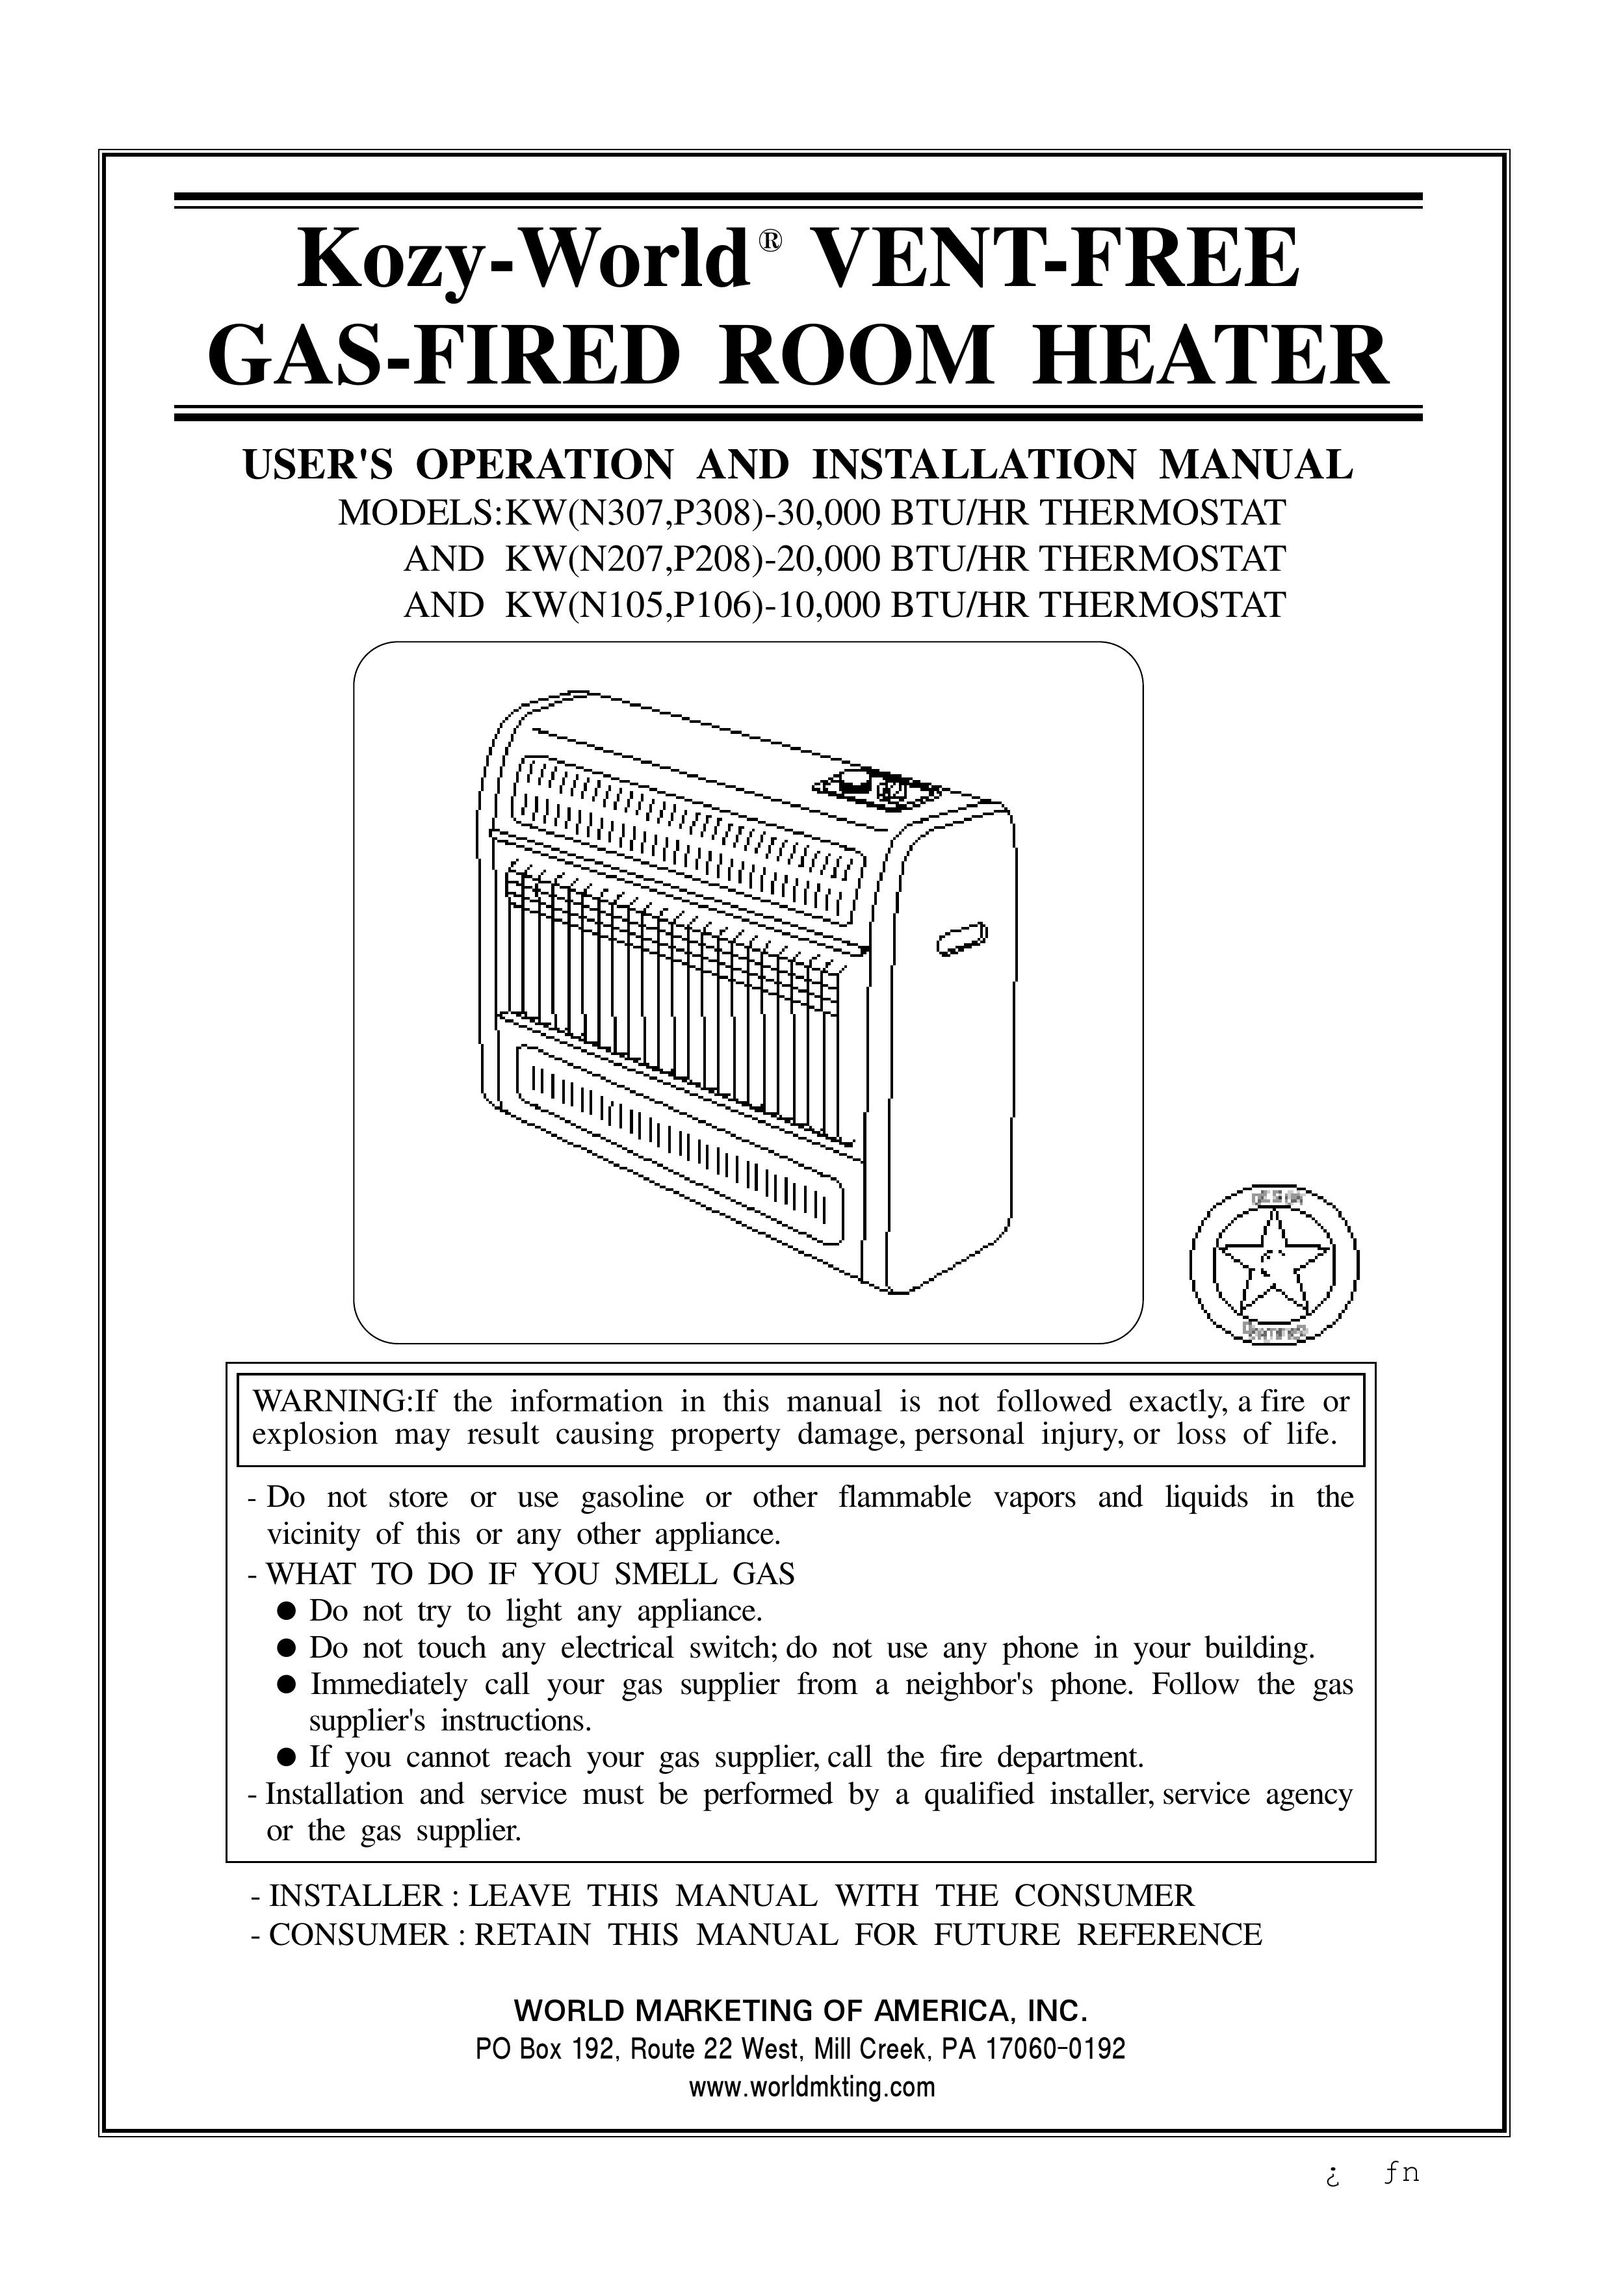 Air King KW(N307,P308) Thermostat User Manual